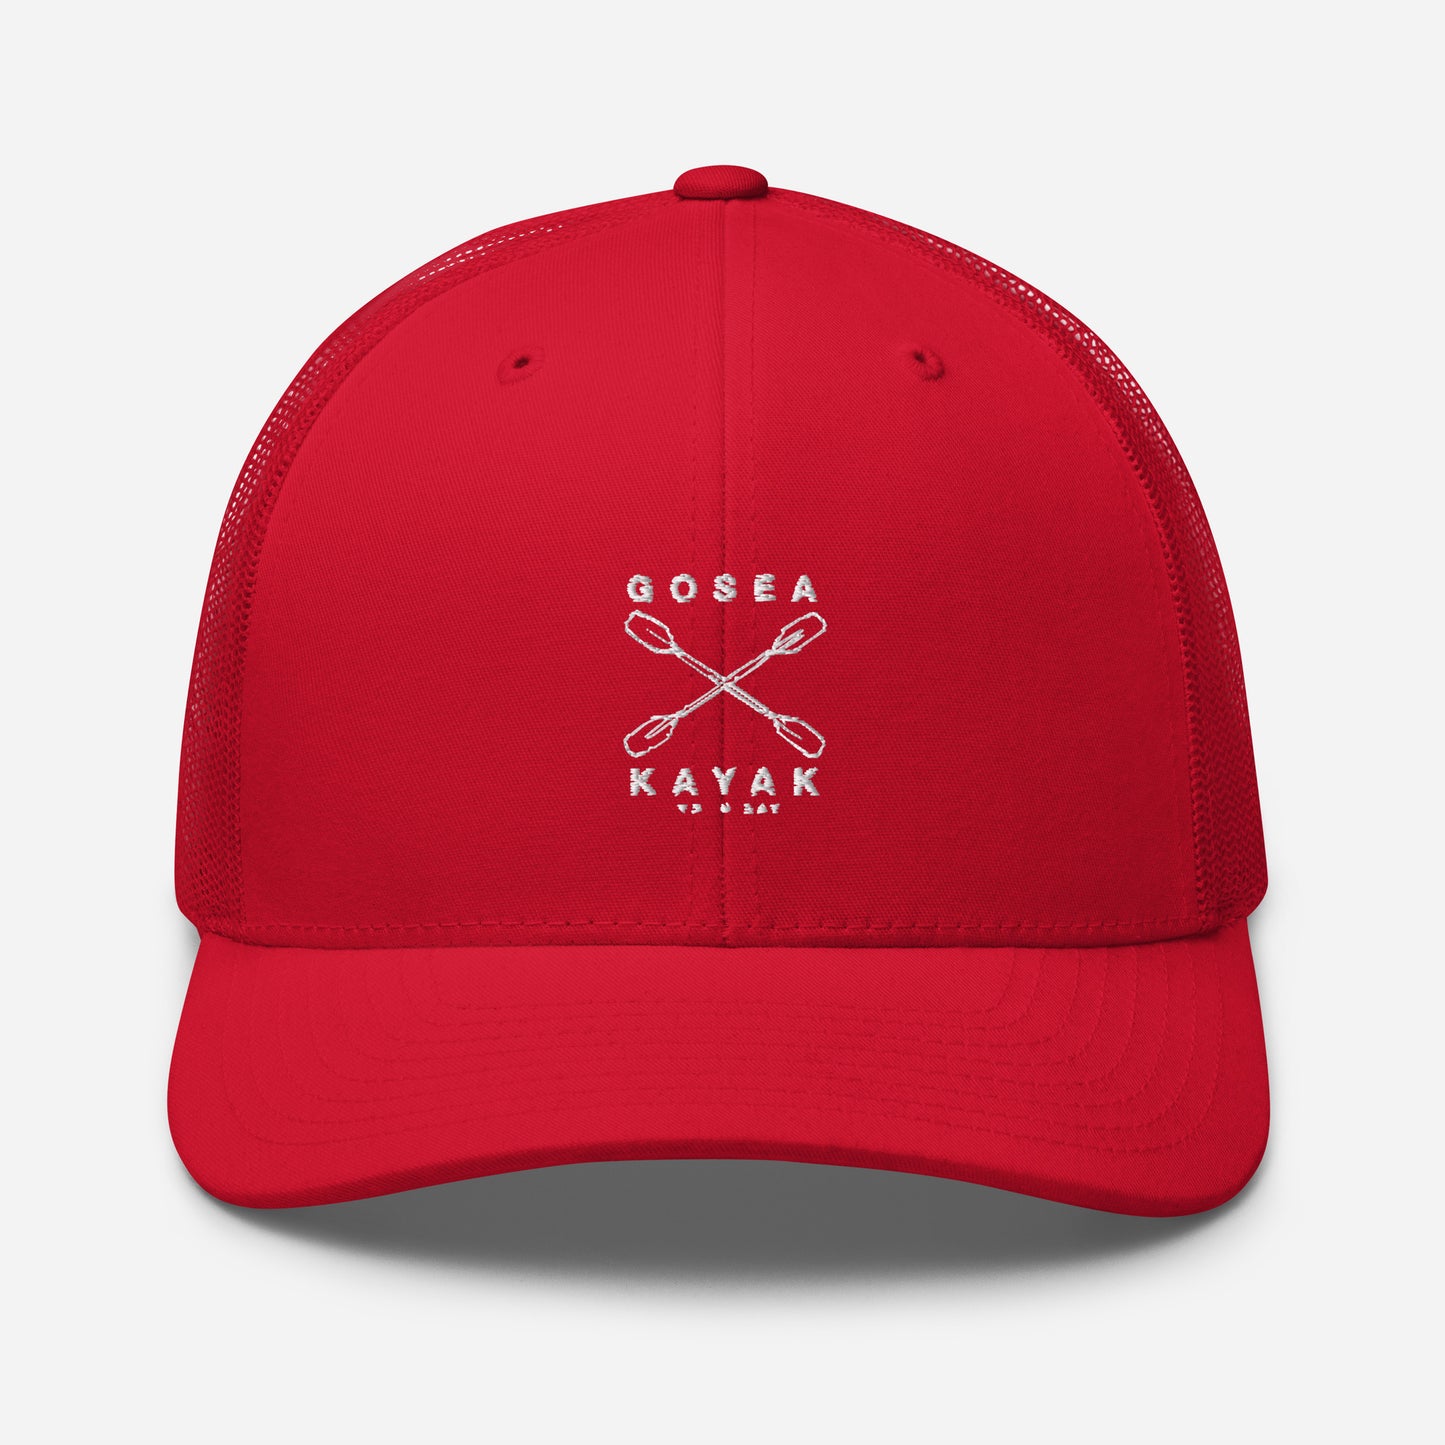  Trucker Cap - Red - Front view  - Crossed Paddles Go Sea Kayak Crew logo in white on front - Genuine Byron Bay Merchandise | Produced by Go Sea Kayak Byron Bay 